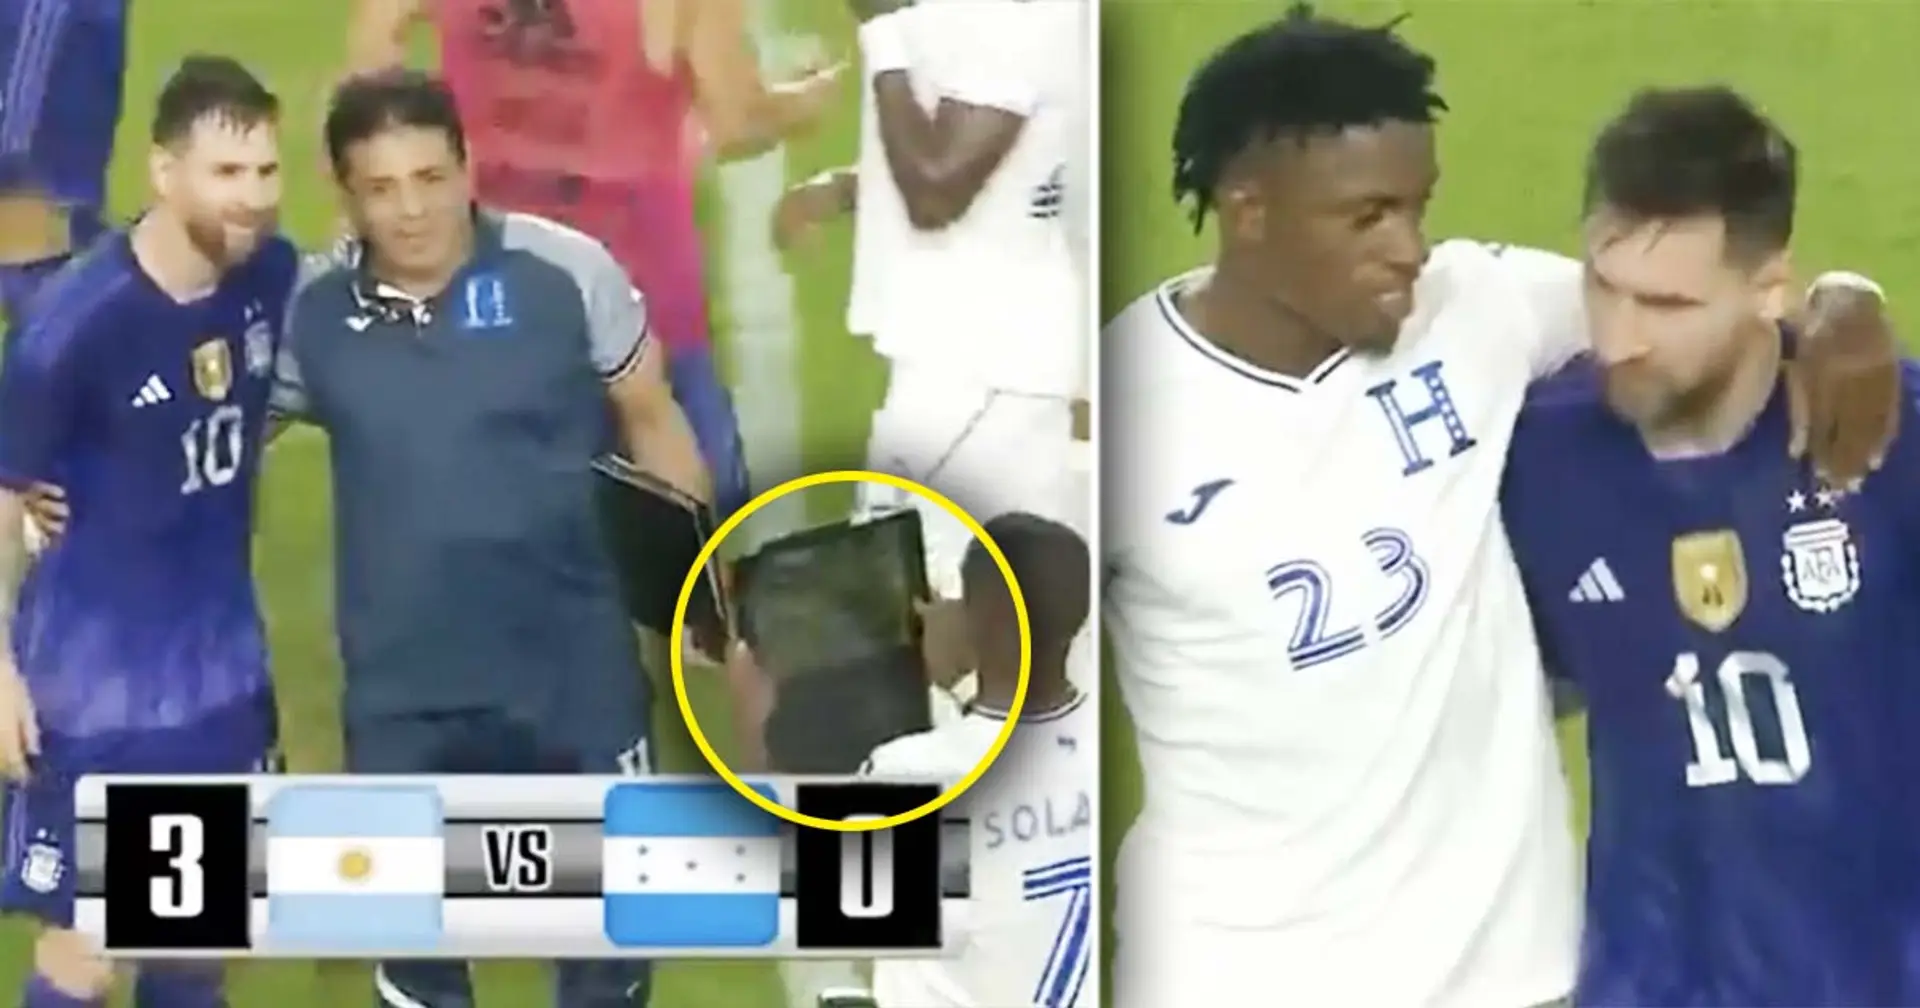 Honduras players and staff take photos with Messi after defeat, some use iPads